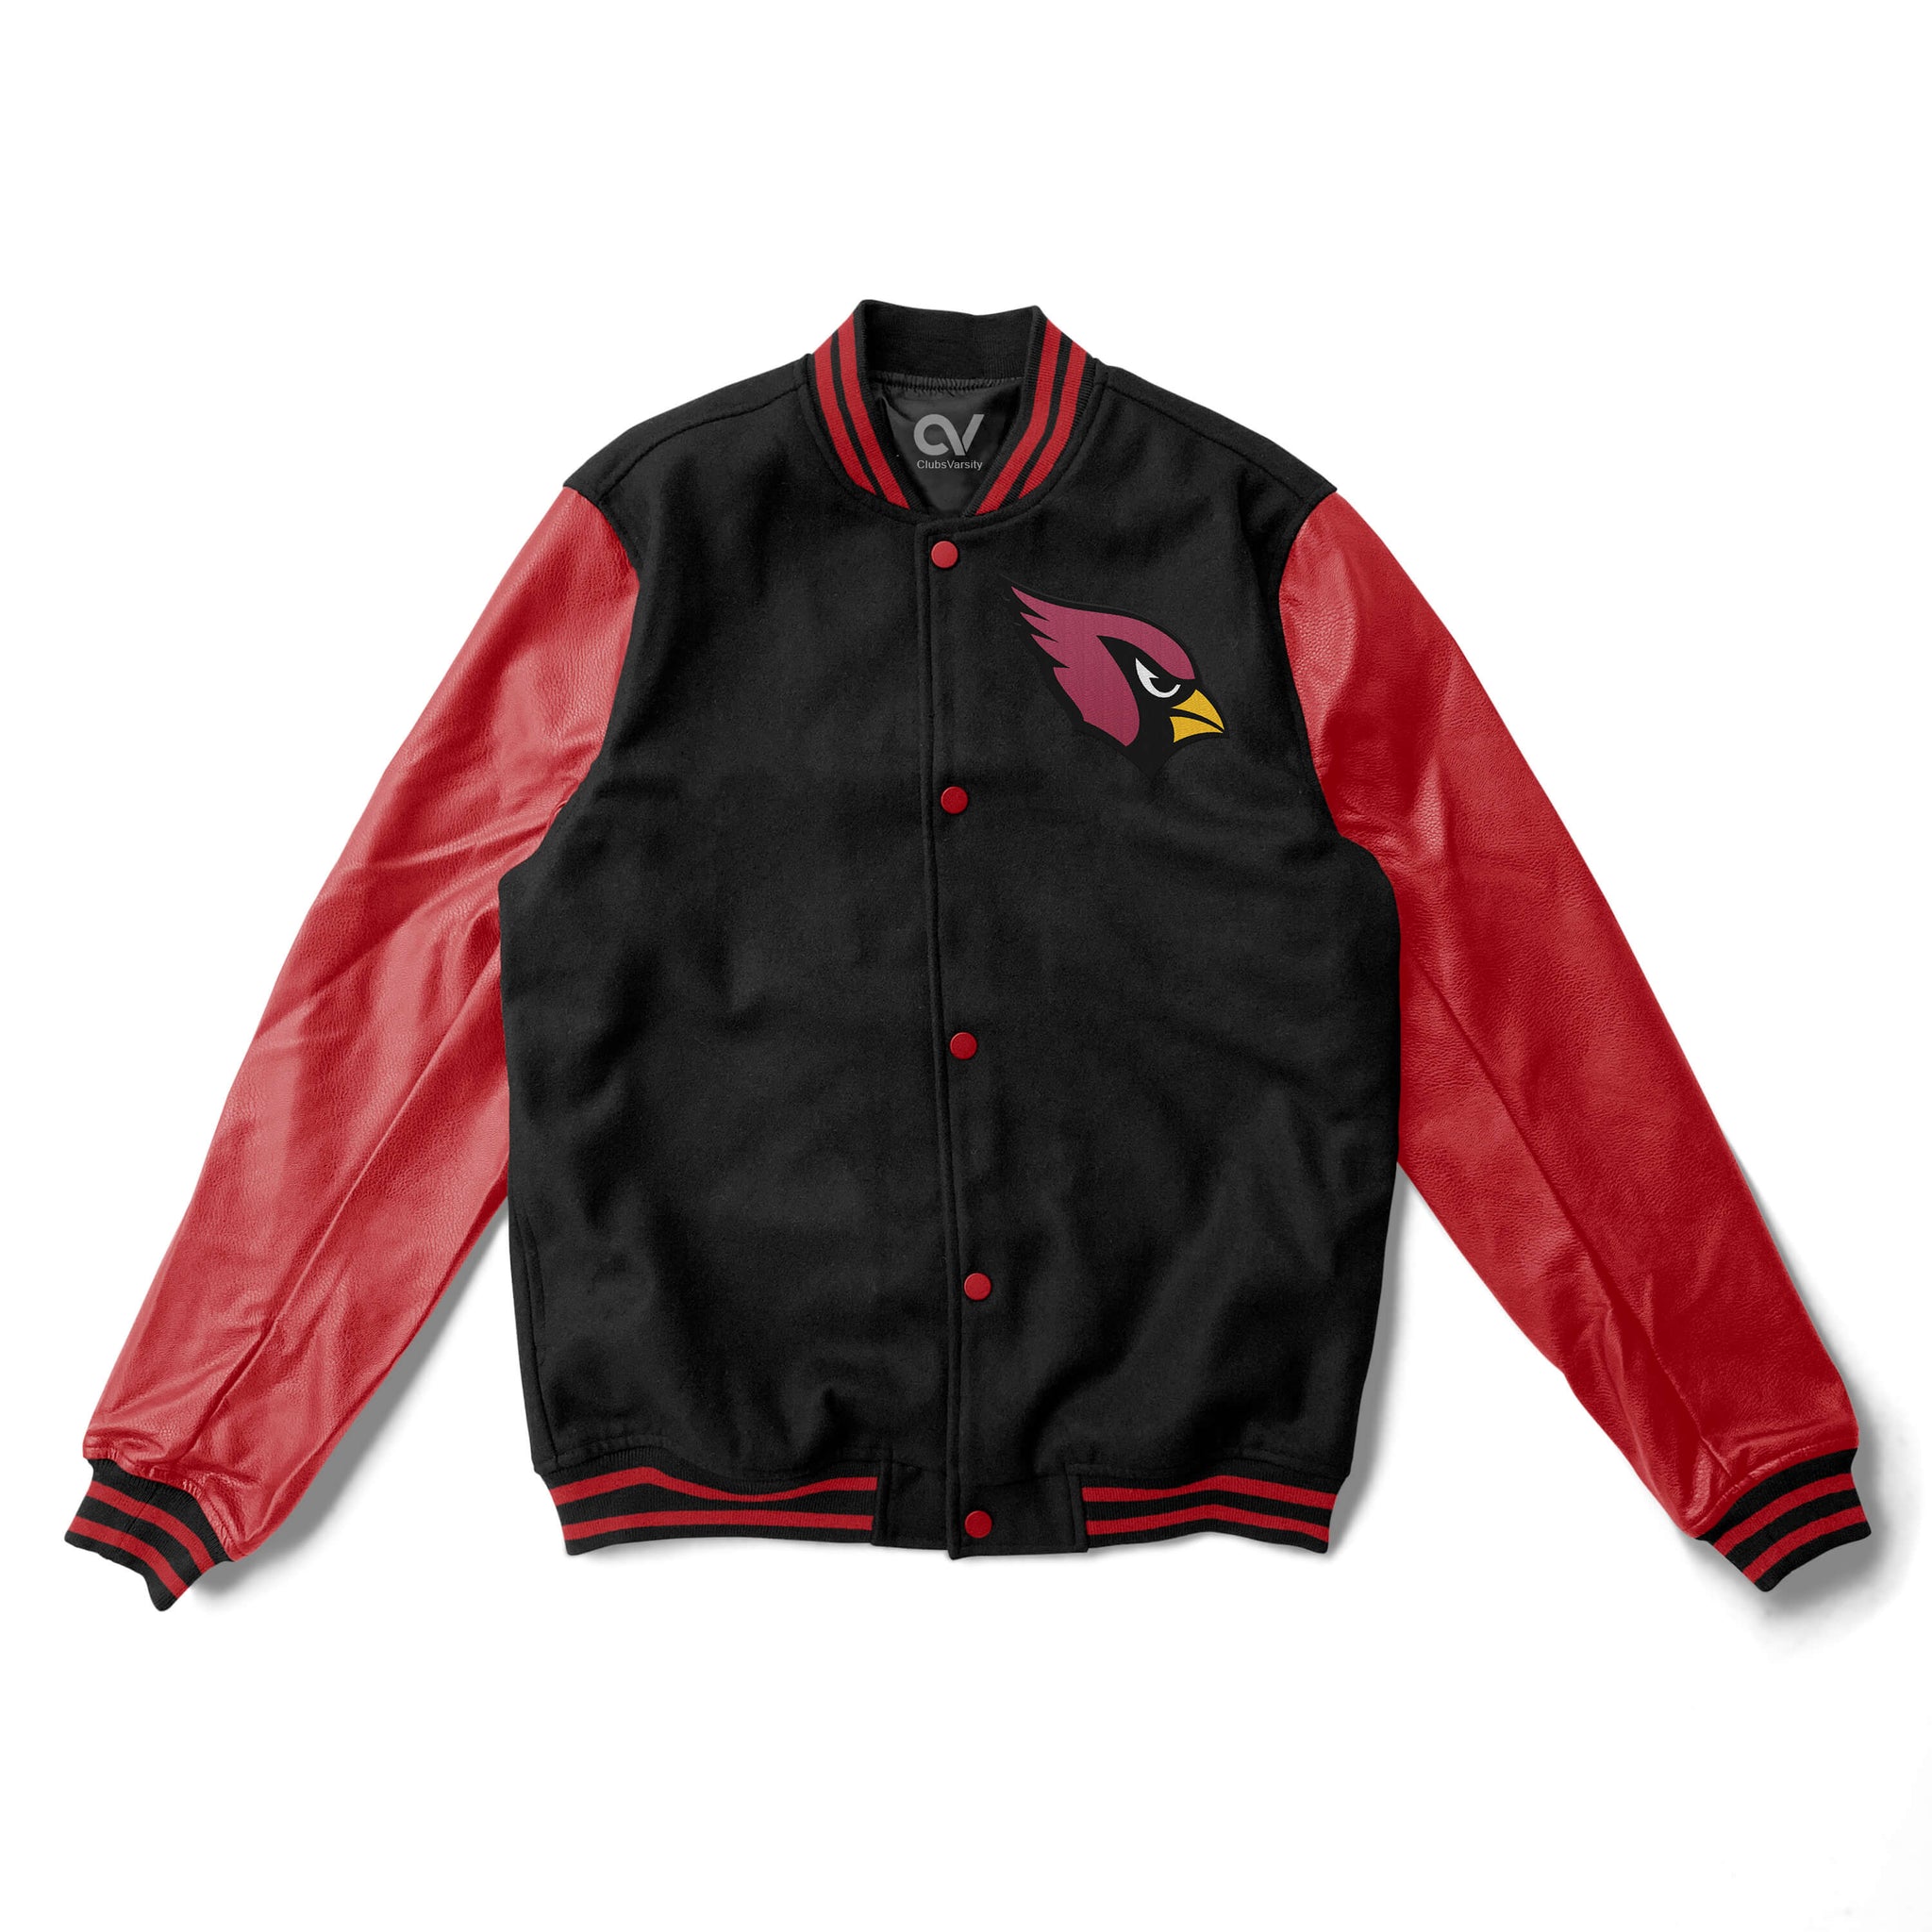 San Francisco Champs Patches 49ers Jacket - New American Jackets